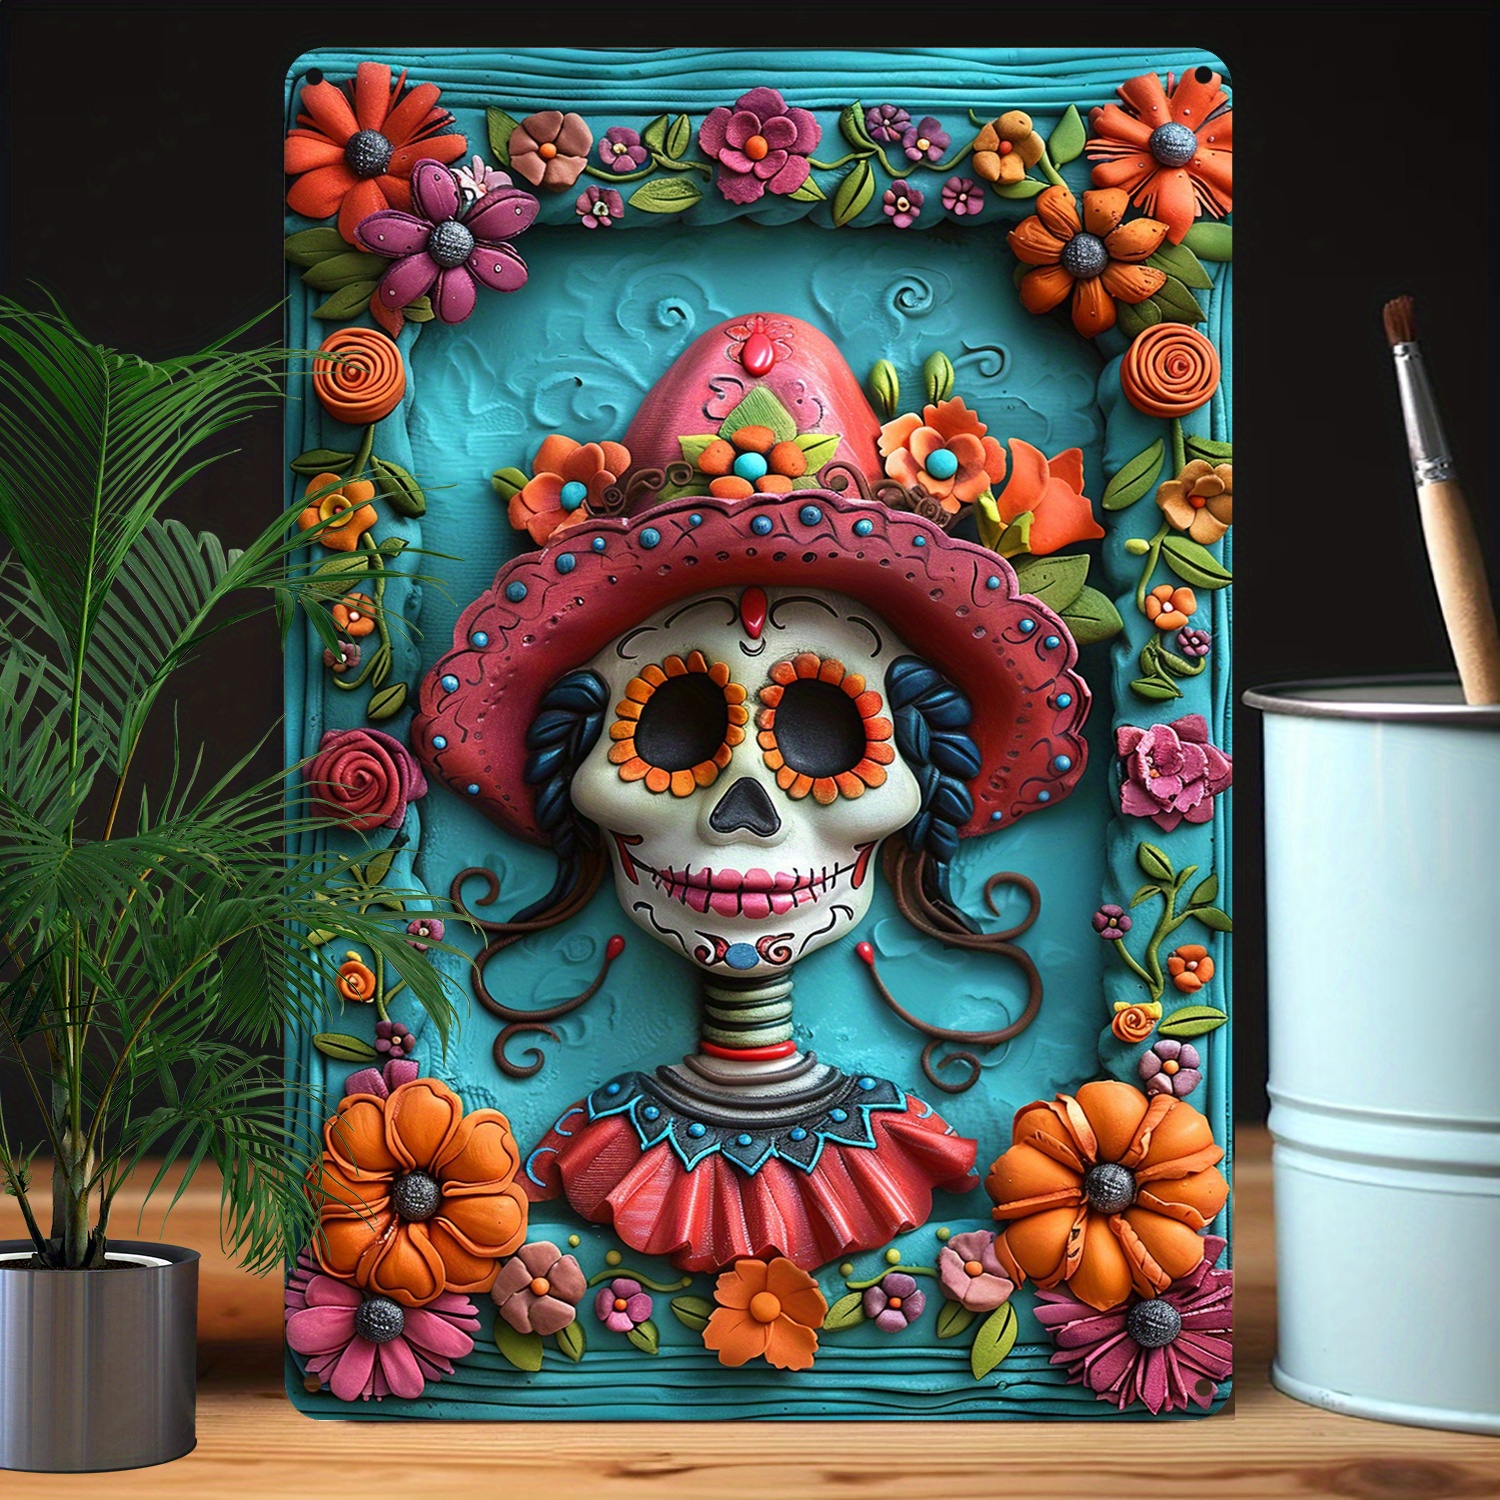 

Vintage-inspired Aluminum Metal Tin Sign - 8x12 Inches, Perfect For Bedroom, Living Room, Bathroom & Garden Decor | Funny Autumn & Winter Theme | Ideal Mother's Birthday Or Day Of The Dead Gift